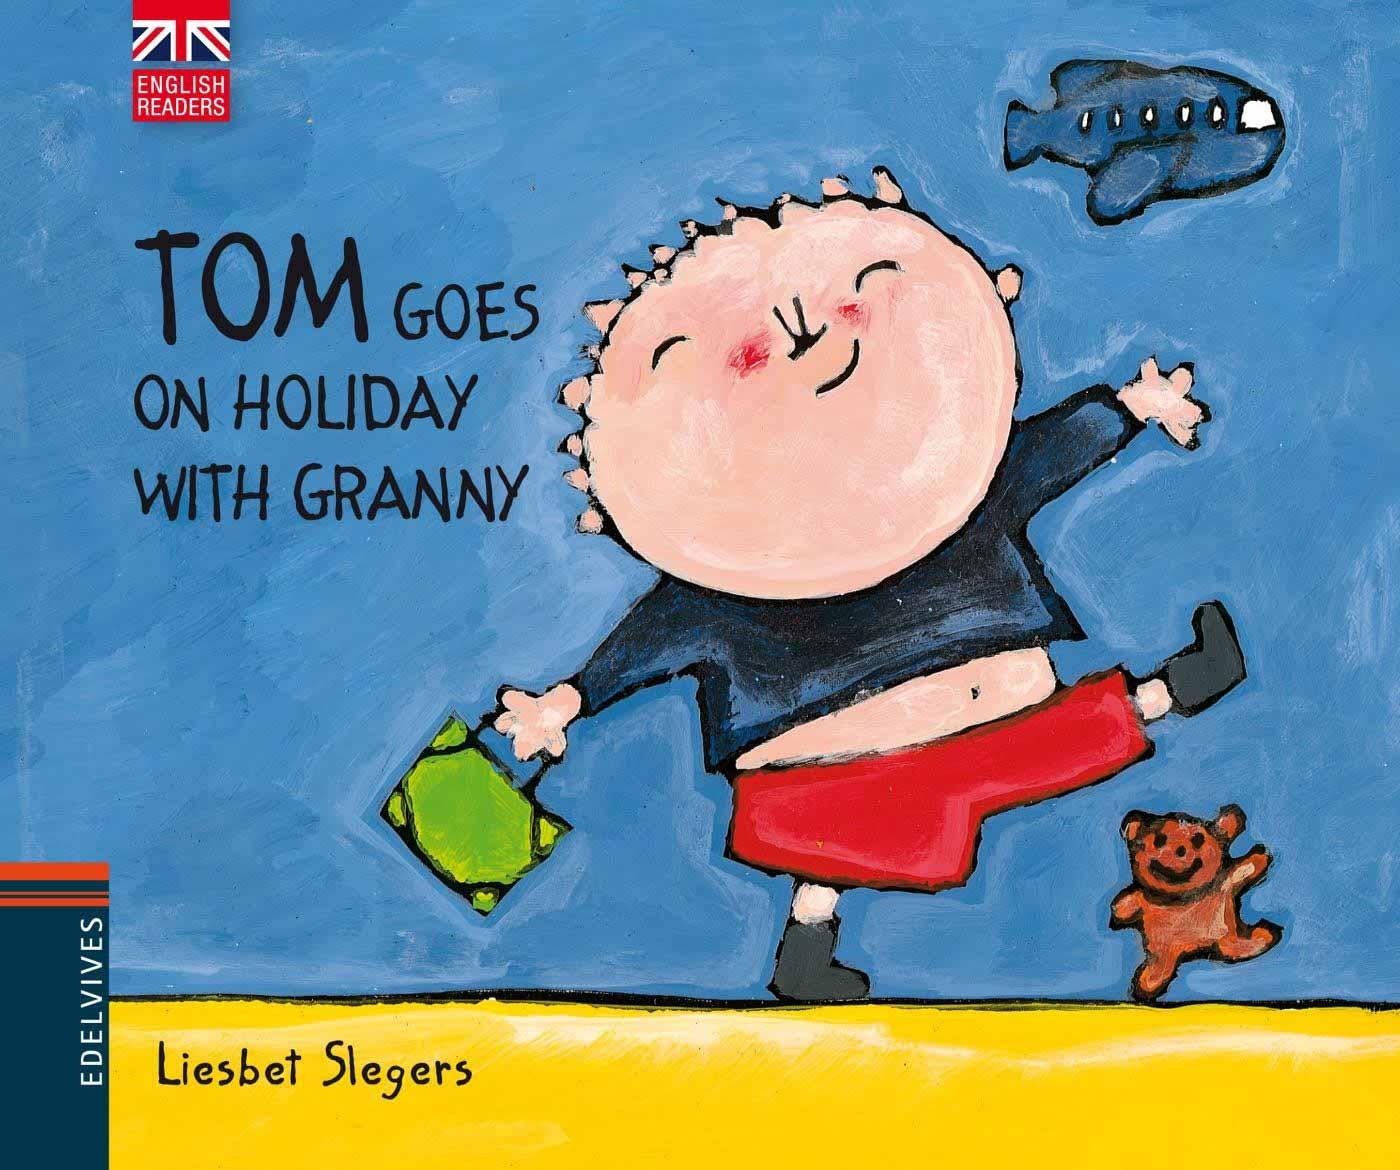 TOM GOES ON HOLIDAY WITH GRANNY. 